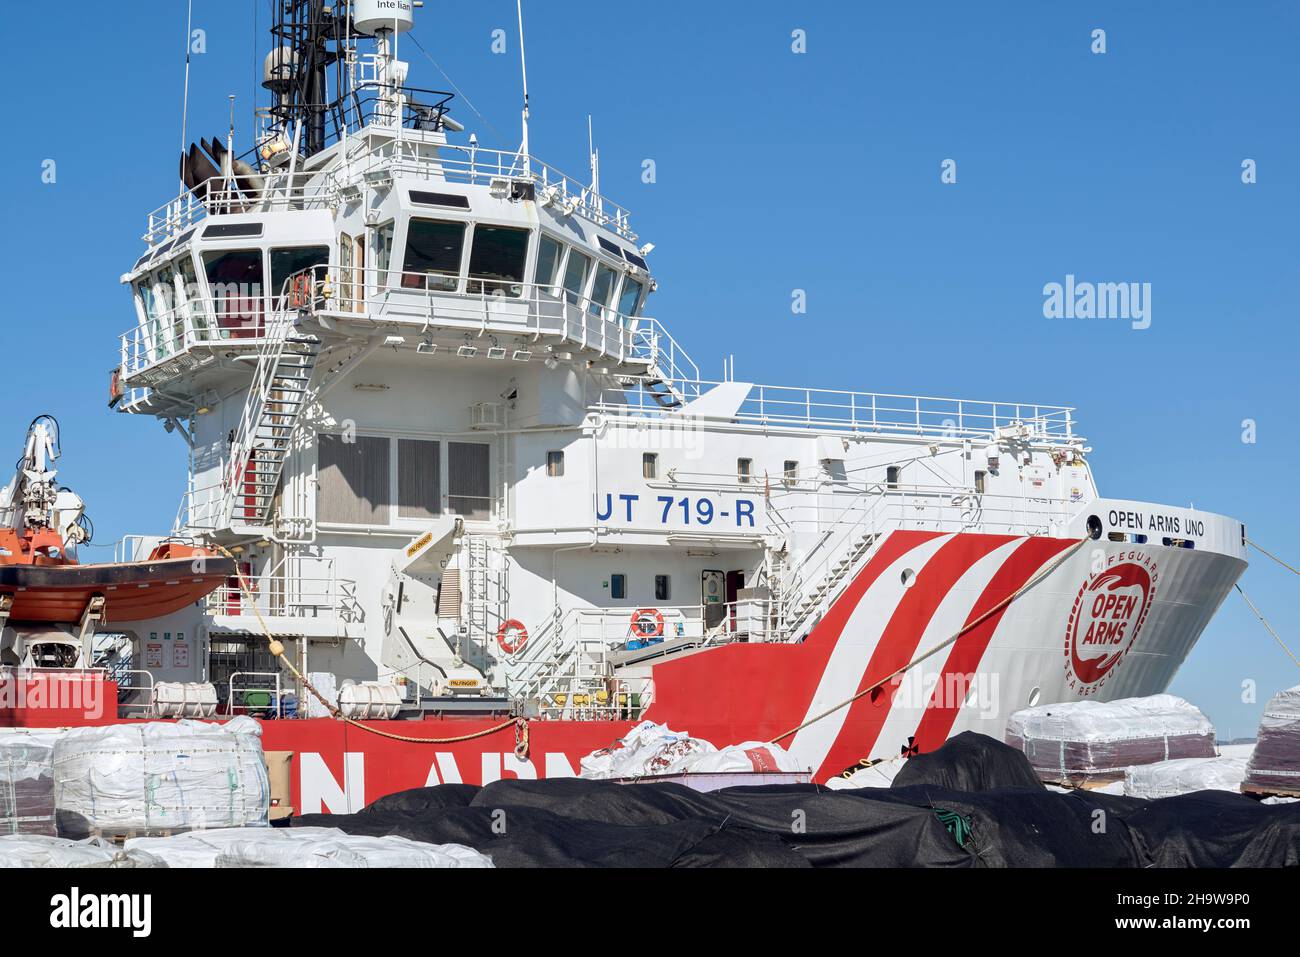 The rescue ship Proactiva 'Open Arms Uno', the imposing boat of the NGO for the "massive rescue" moored at the dock of the port of the Burriana town, Stock Photo